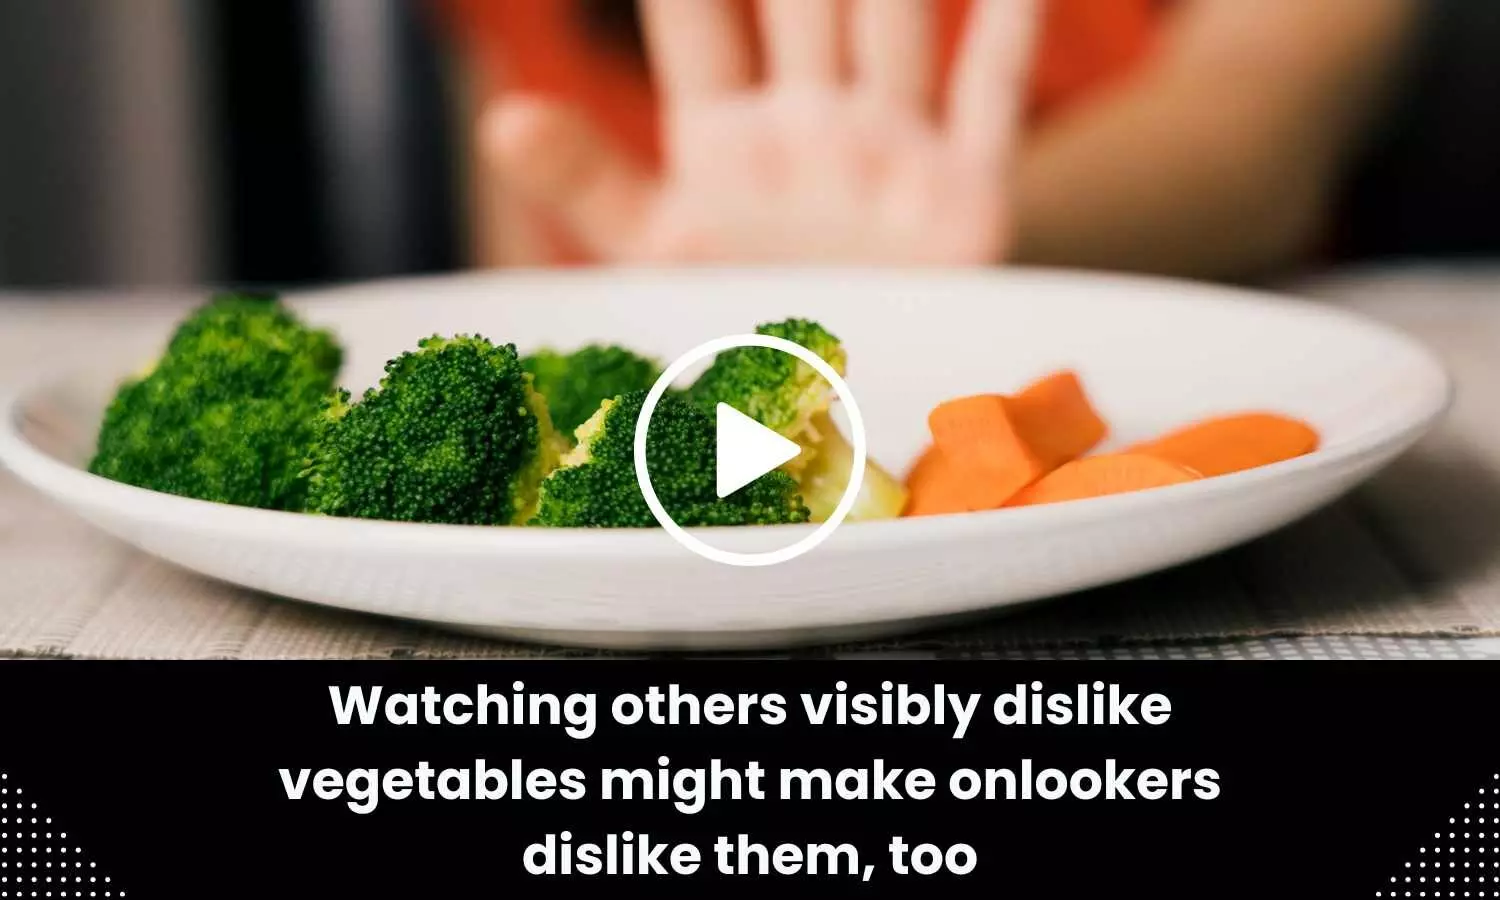 Watching others visibly dislike vegetables might make onlookers dislike them too